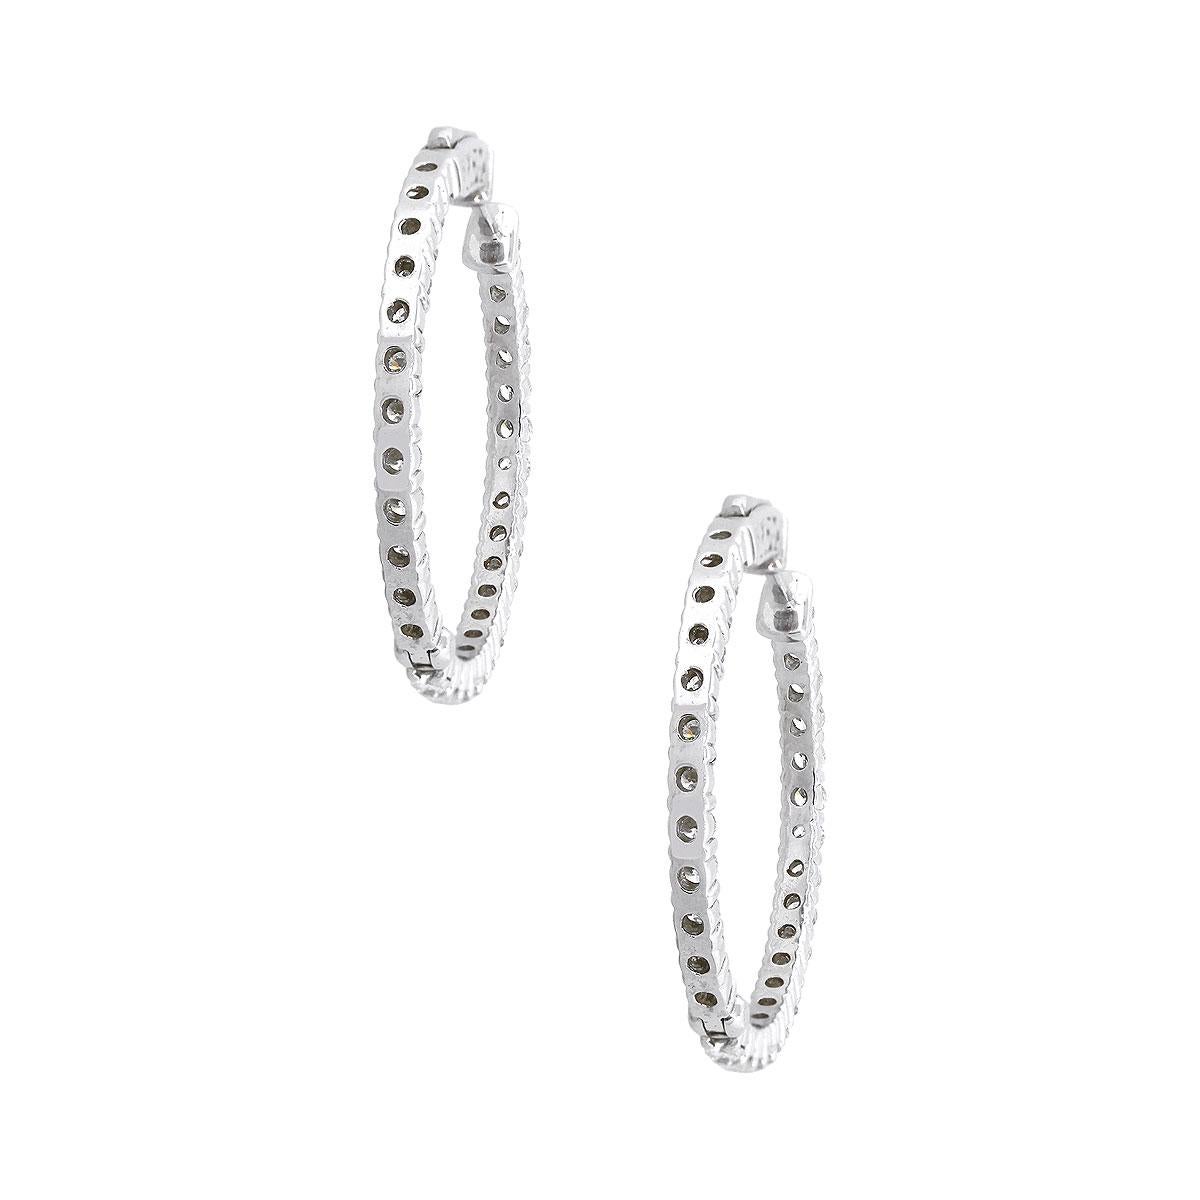 Material: 14k White Gold
Diamond Details: Approximately 2.81ctw of round brilliant diamonds. Diamonds are G/H in color and SI in clarity
Measurements: 1″ x 0.11″ x 1″
Earrings Backs: Hinged Backs
Total Weight: 8.8g (5.7dwt)
SKU: A30312430